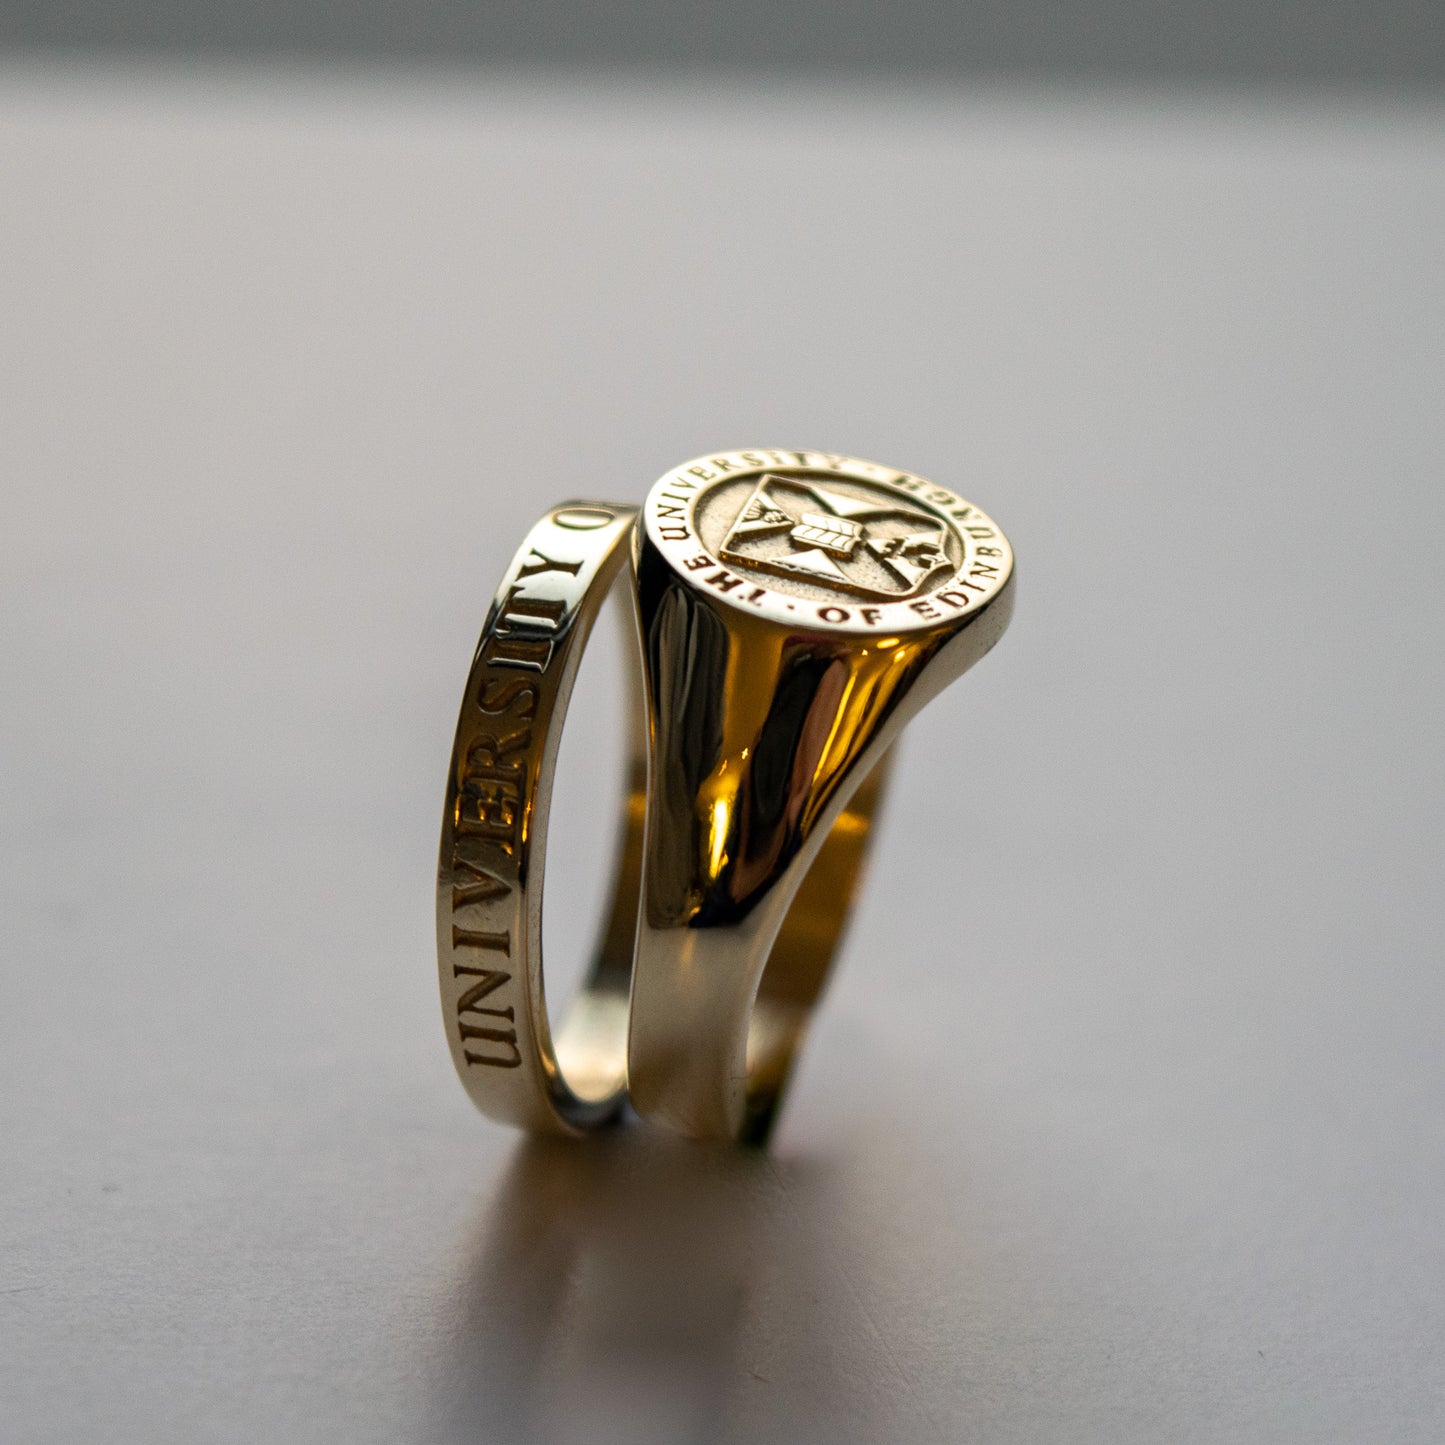 Gold graduation Signet Ring featuring the University crest with thin gold band ring bhind